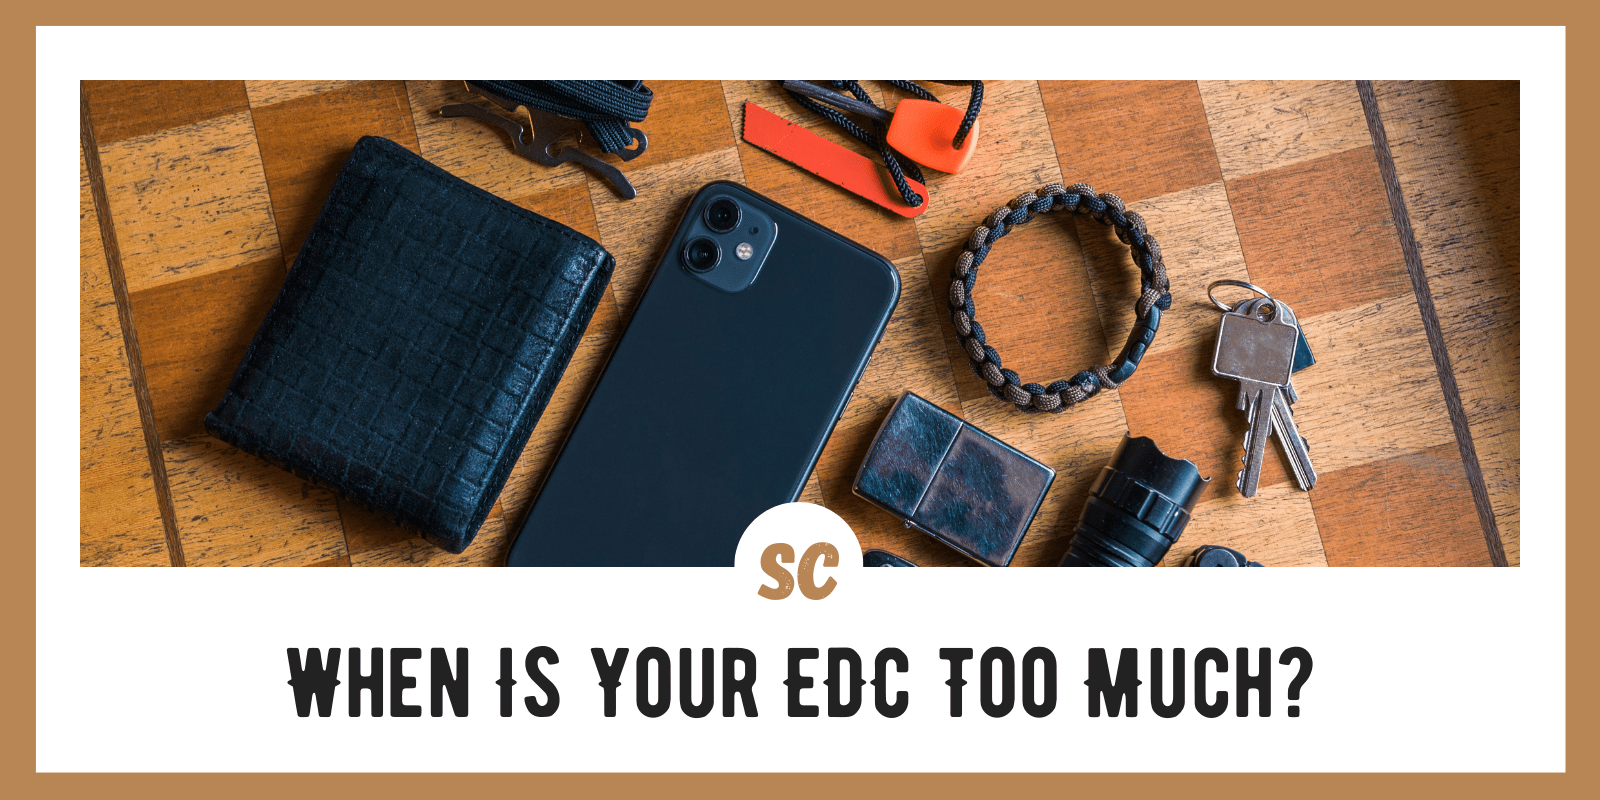 When Is Your EDC Too Much? 4 Must-Know EDC Guidelines